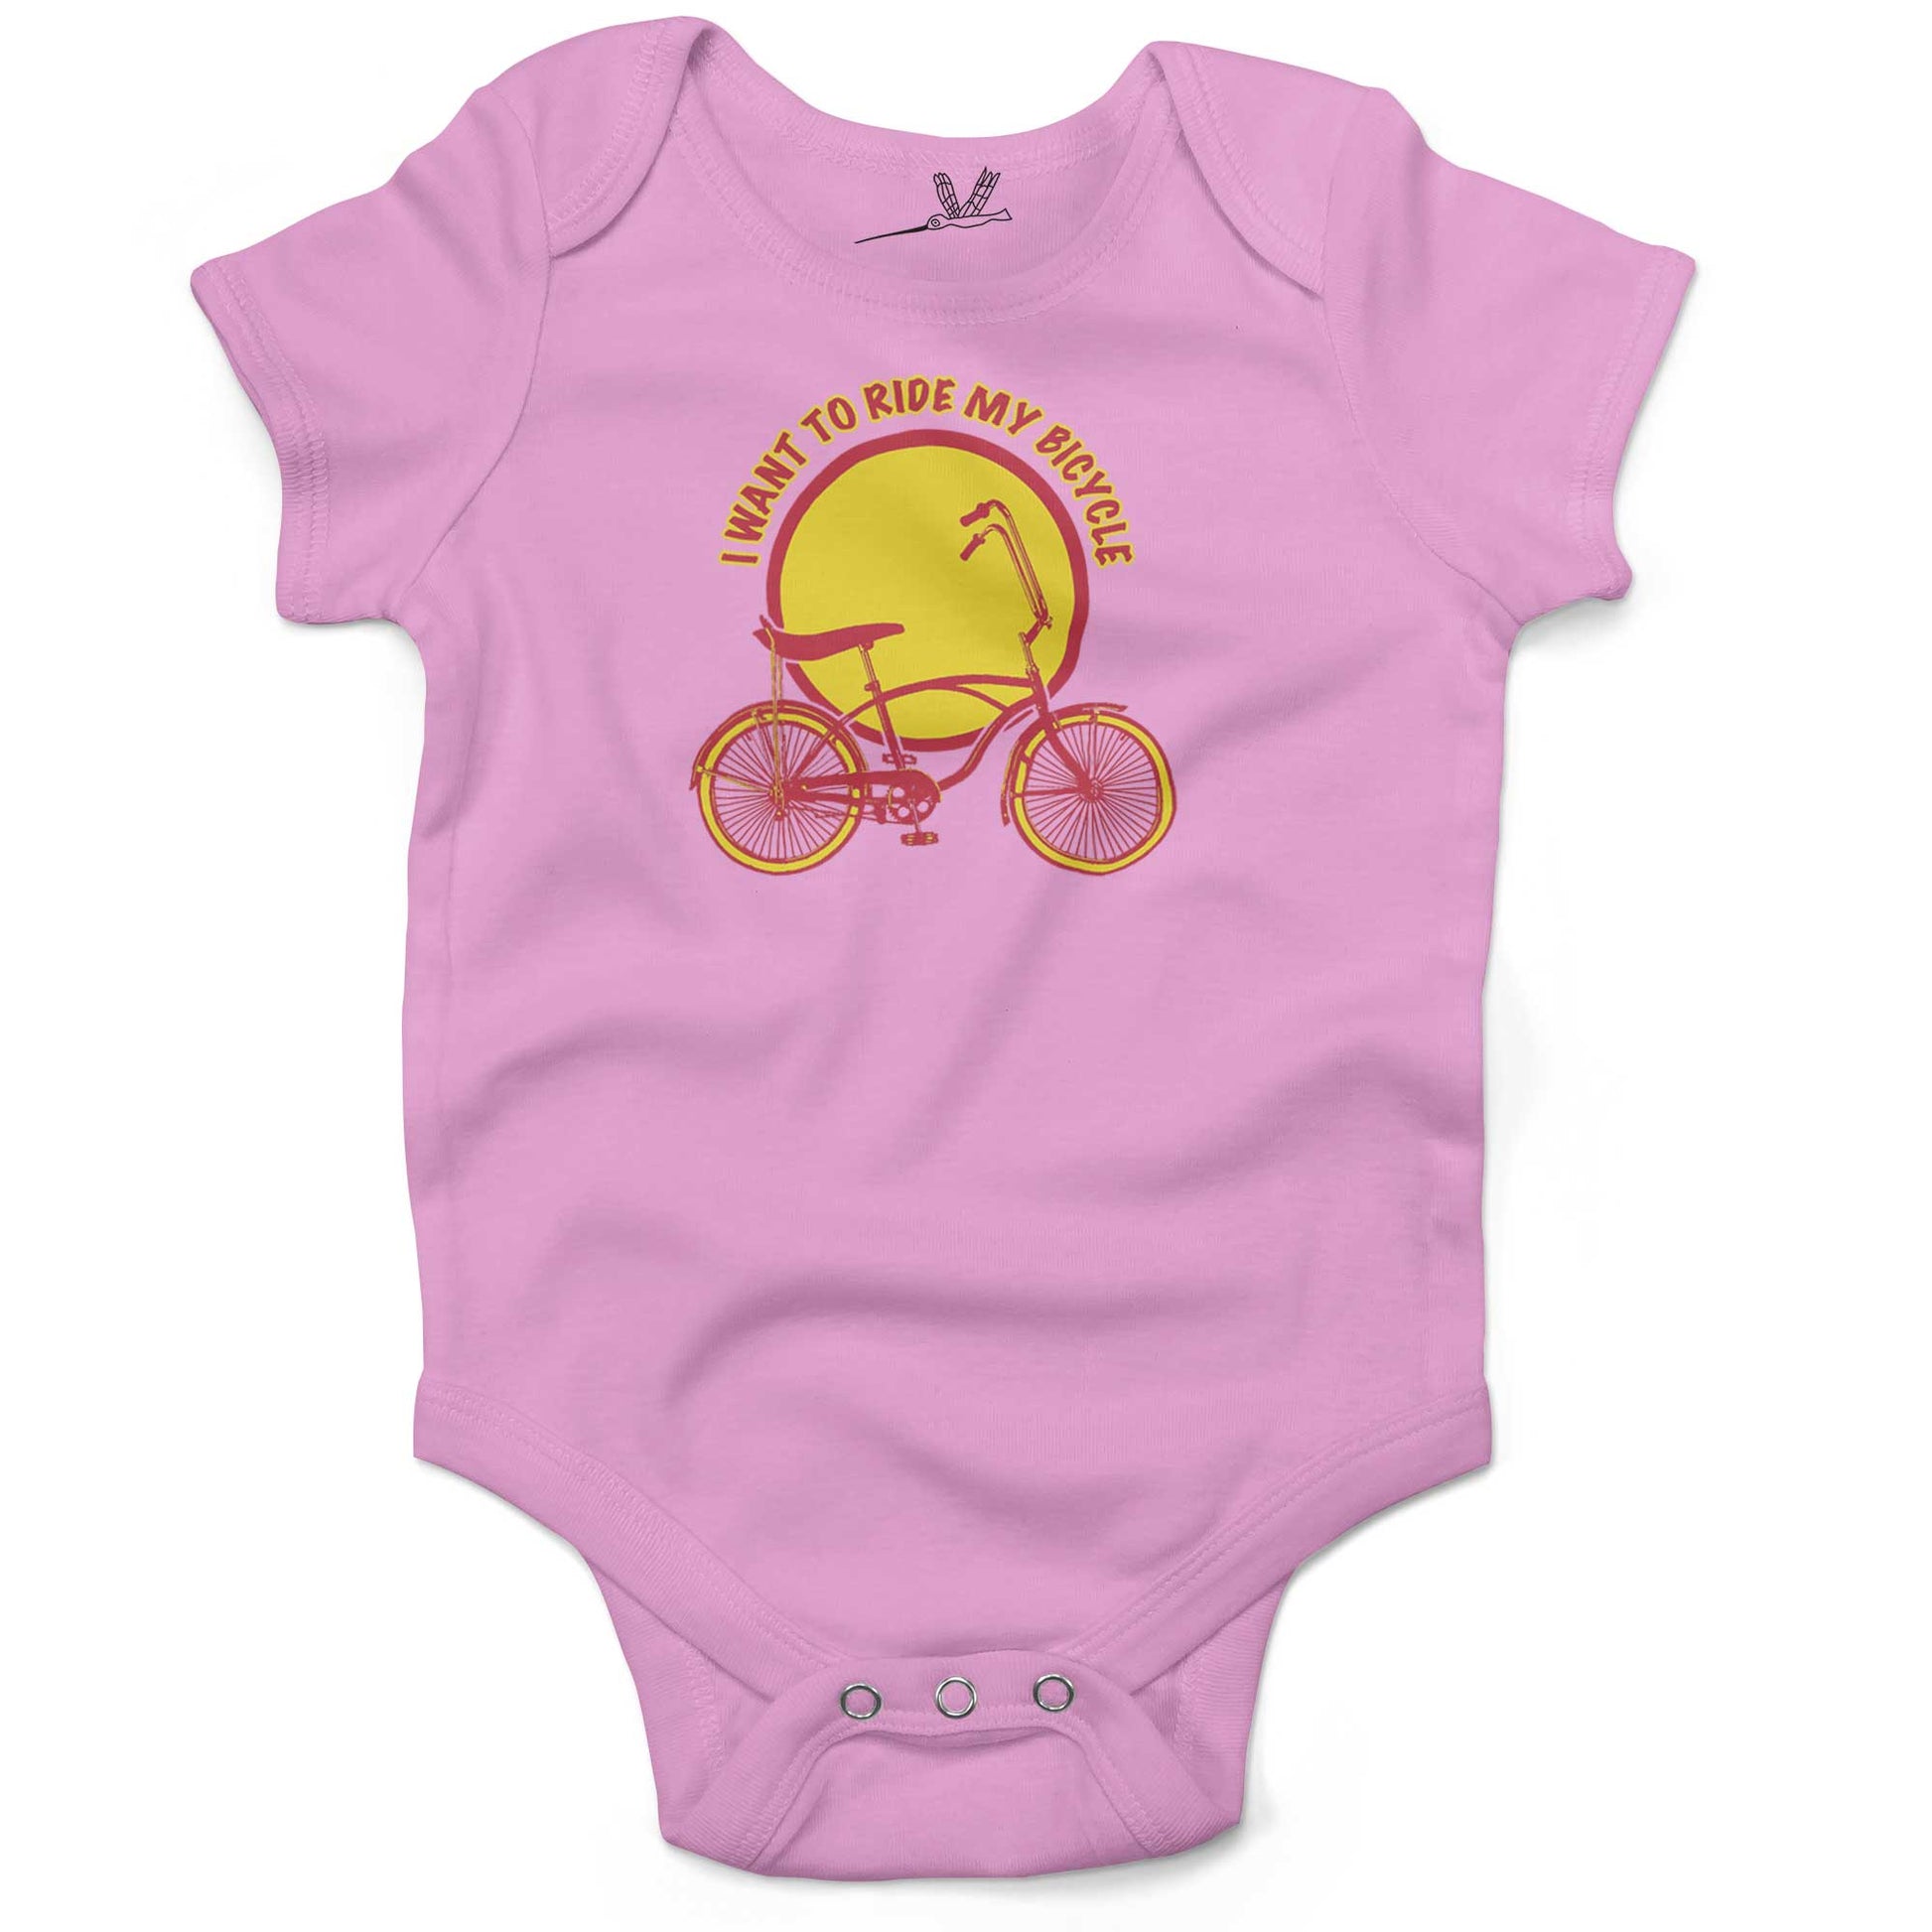 I Want To Ride My Bicycle Infant Bodysuit or Raglan Baby Tee-Organic Pink-3-6 months